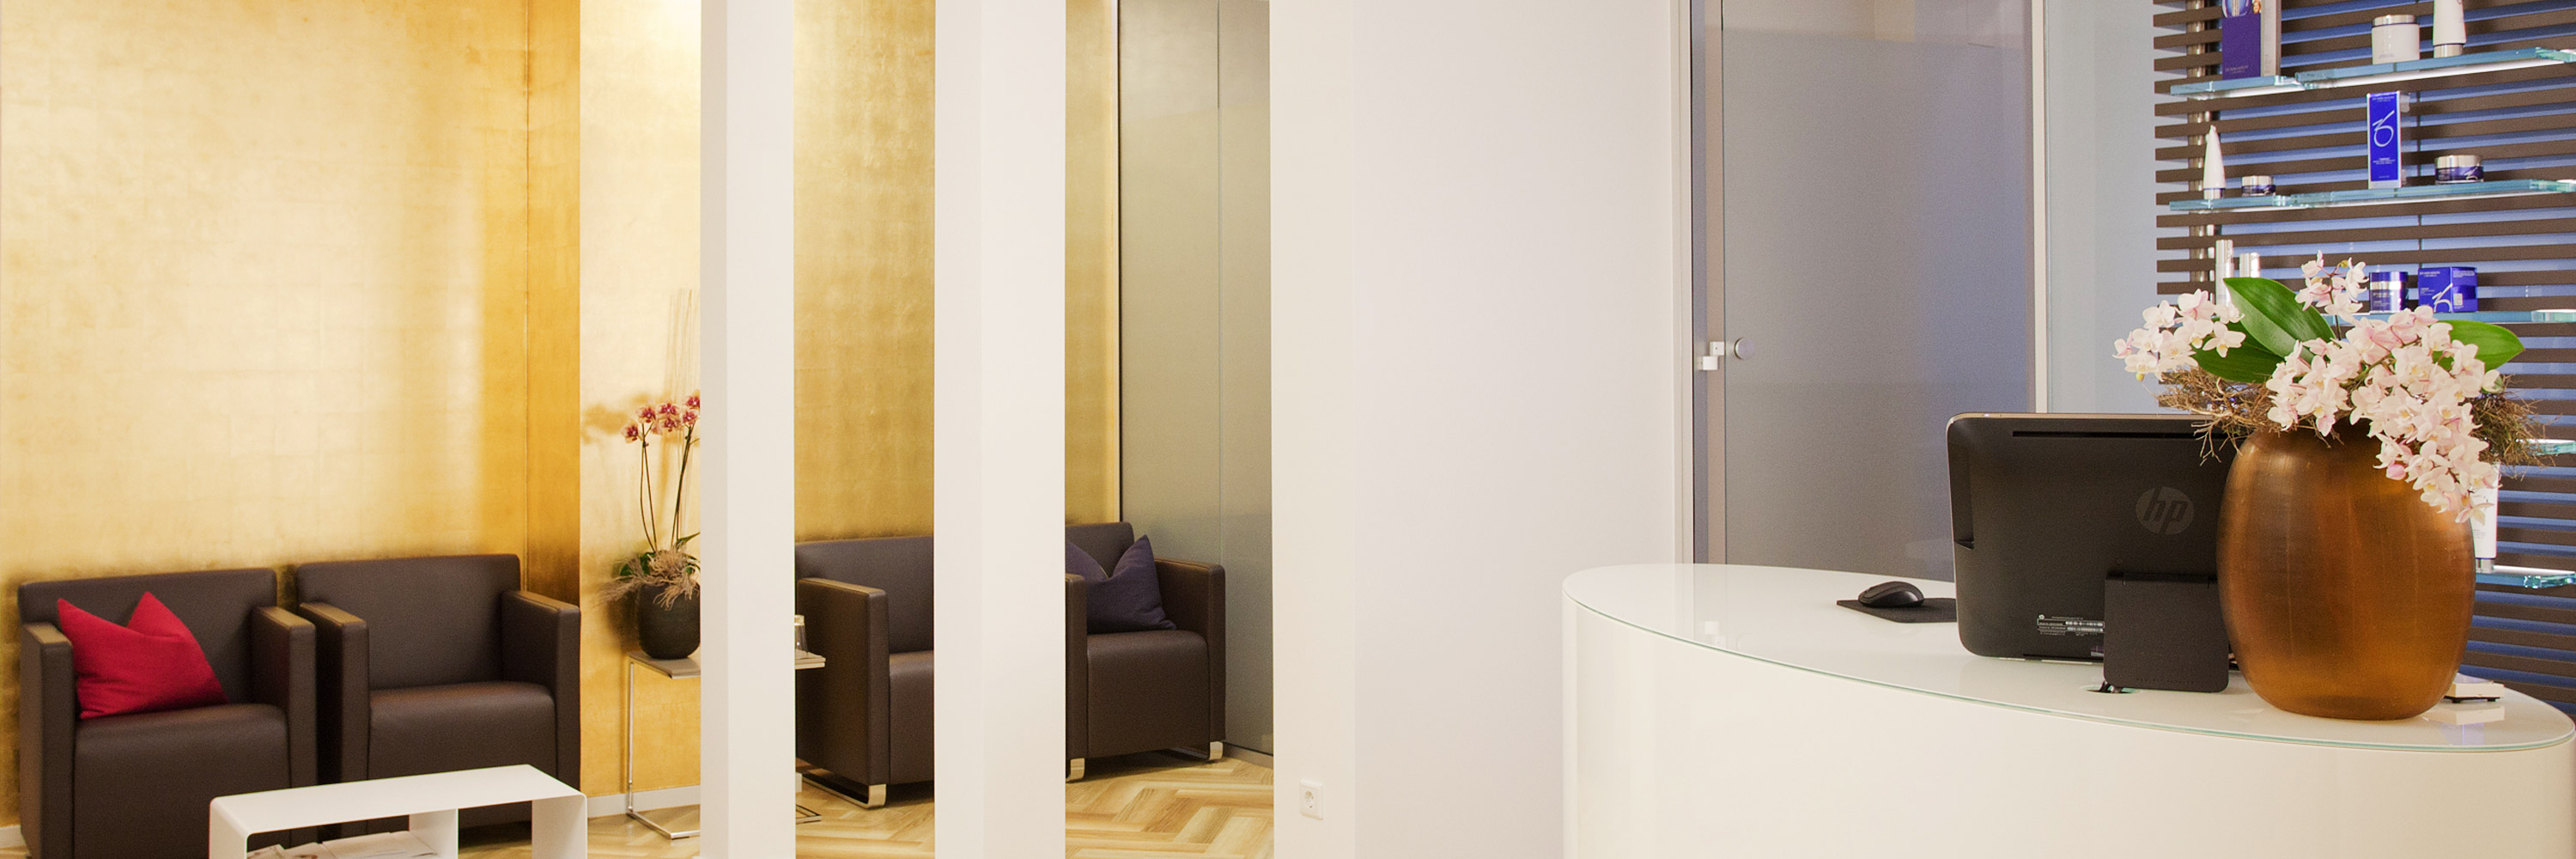 Reception room of the Institute for skin care and skin treatments in Frankfurt am Main. In the foreground a reception counter with fresh flowers and monitor. In the background dark soft chair. The wall behind the seats is in gold.